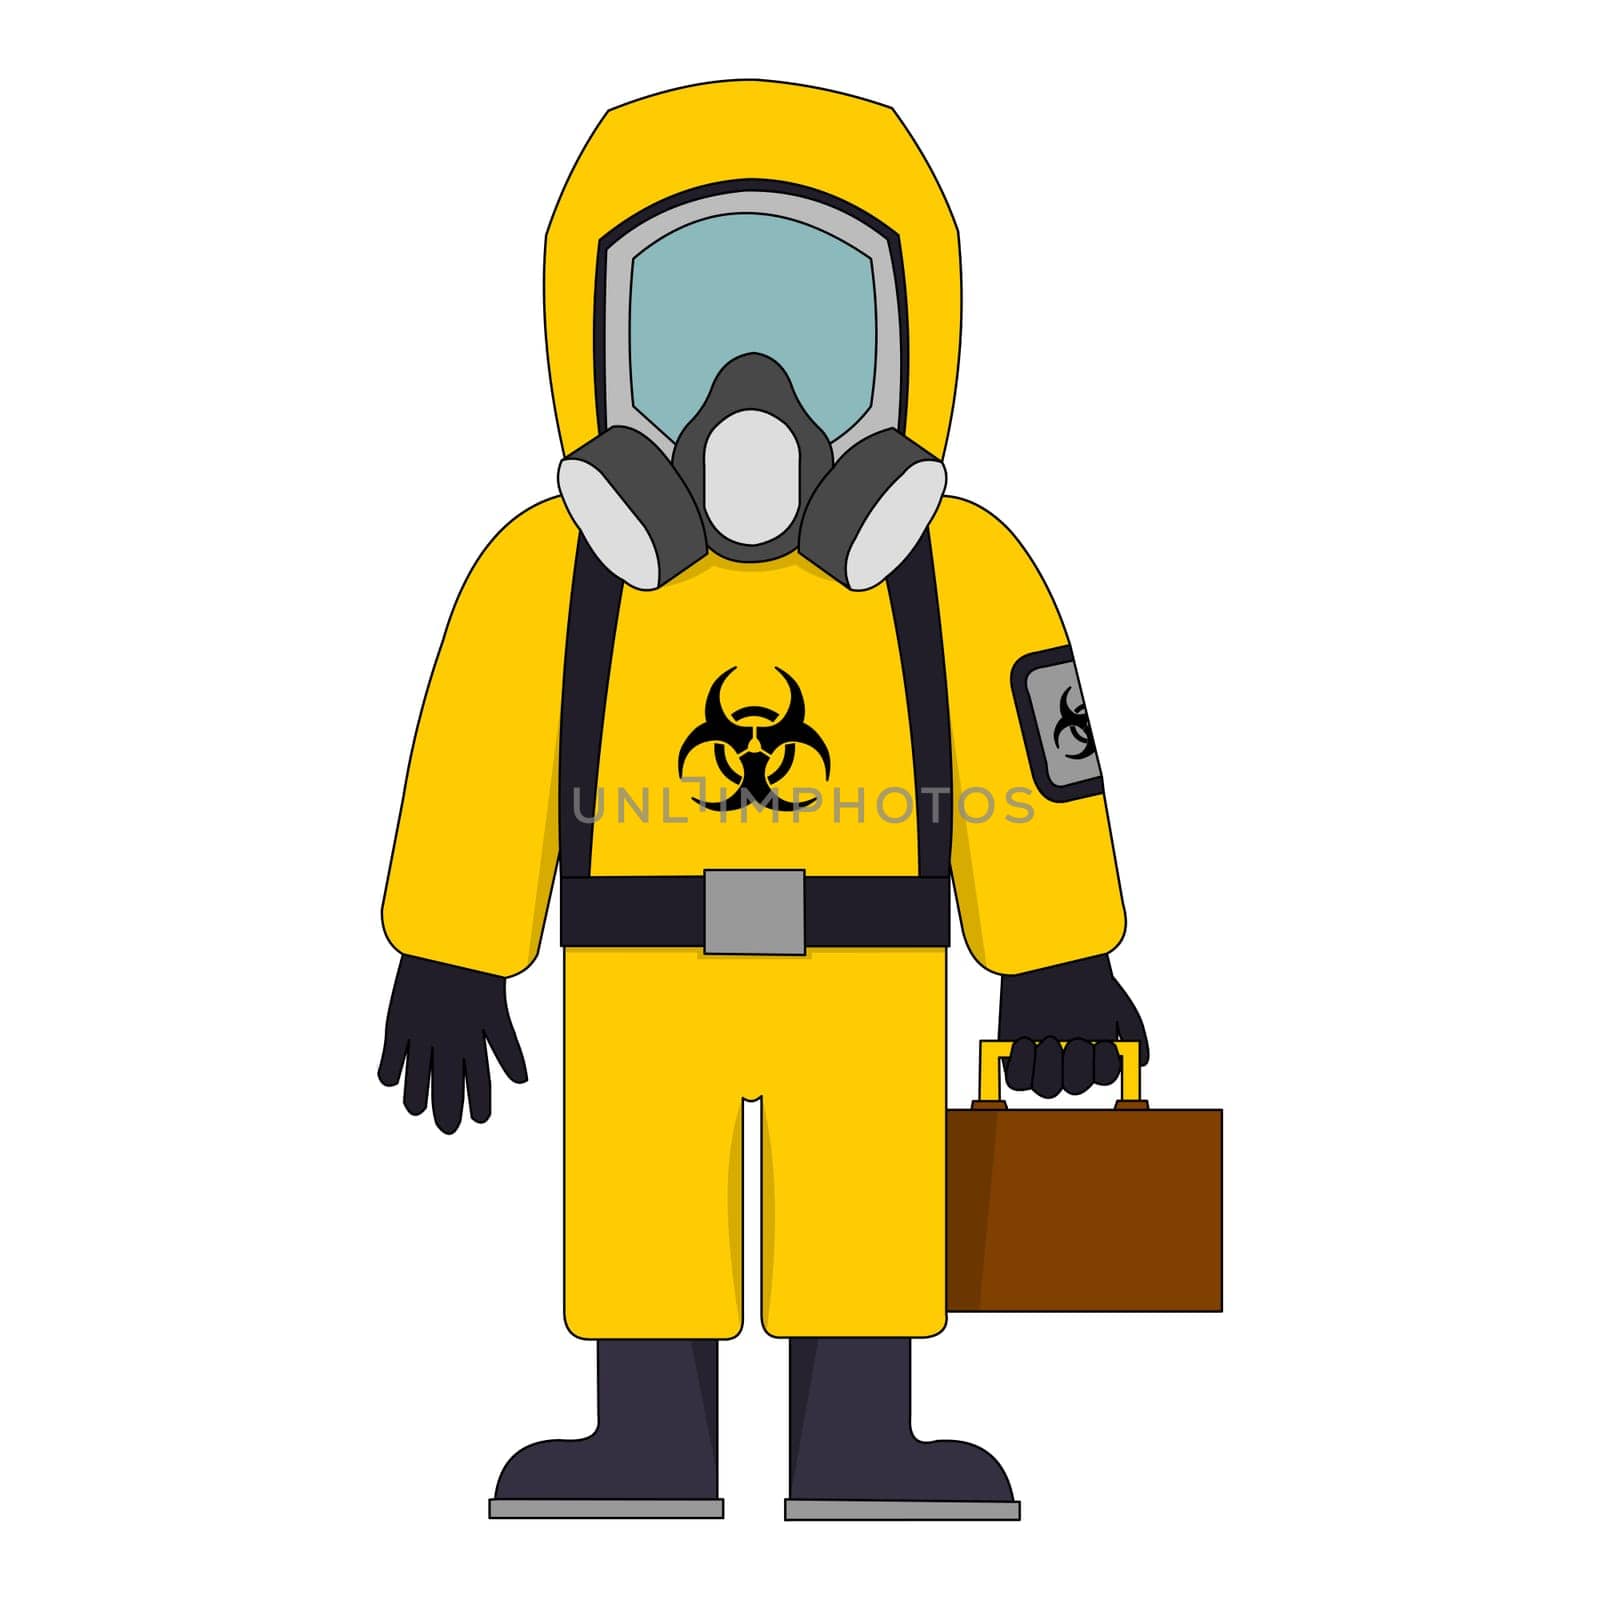 A yellow hazard suit holding a suitcase.